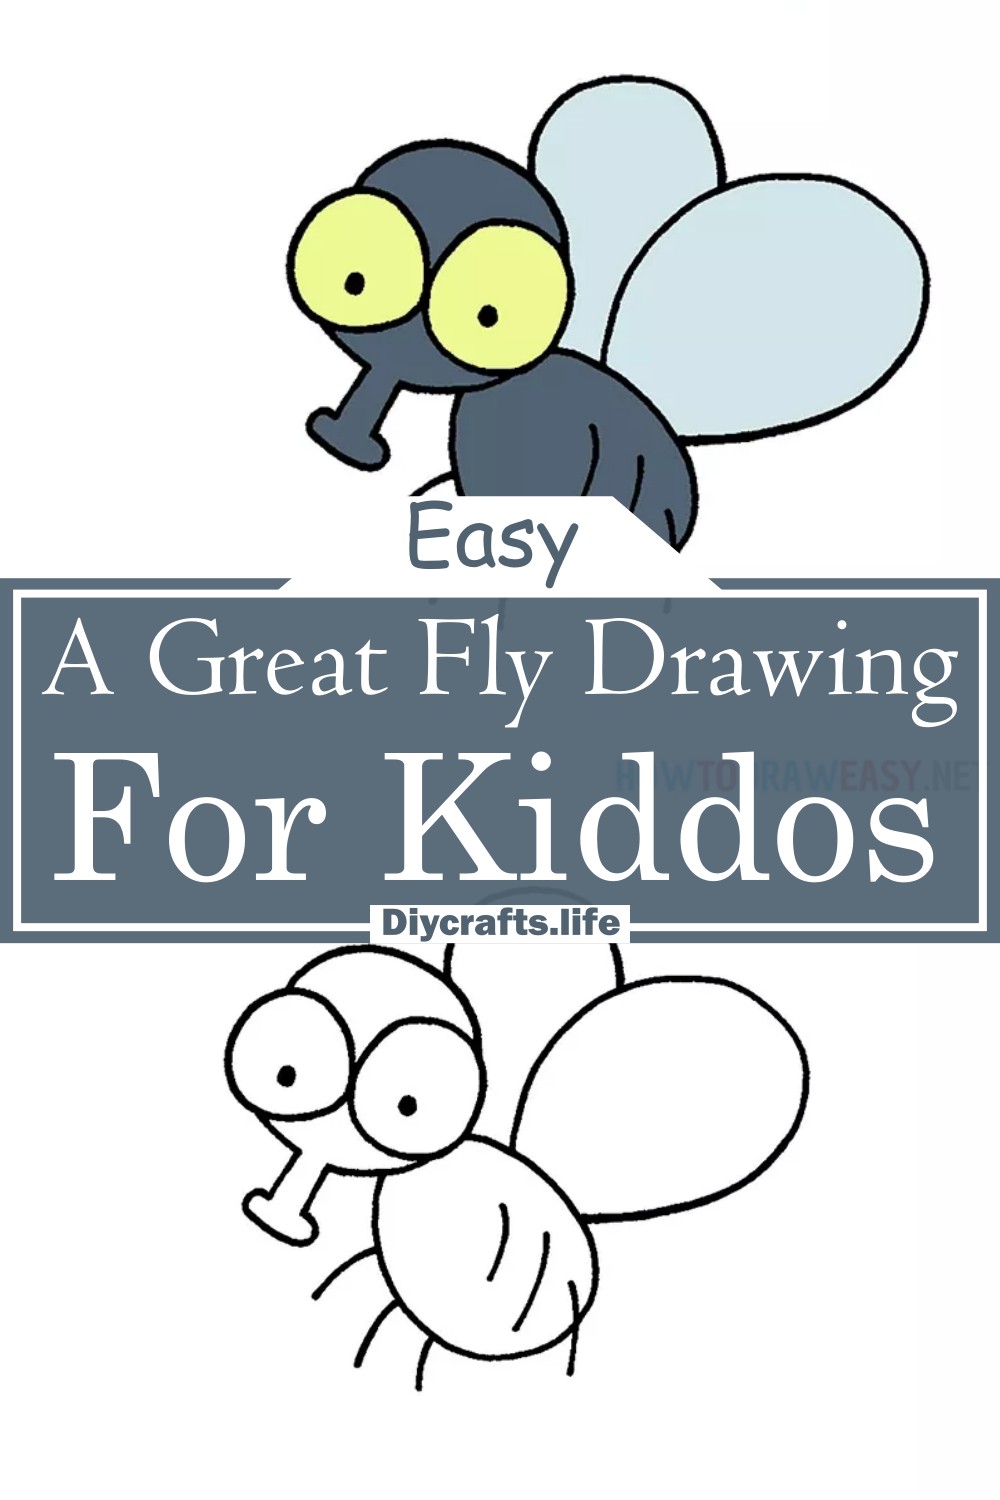 A Great Fly Drawing For Kiddos